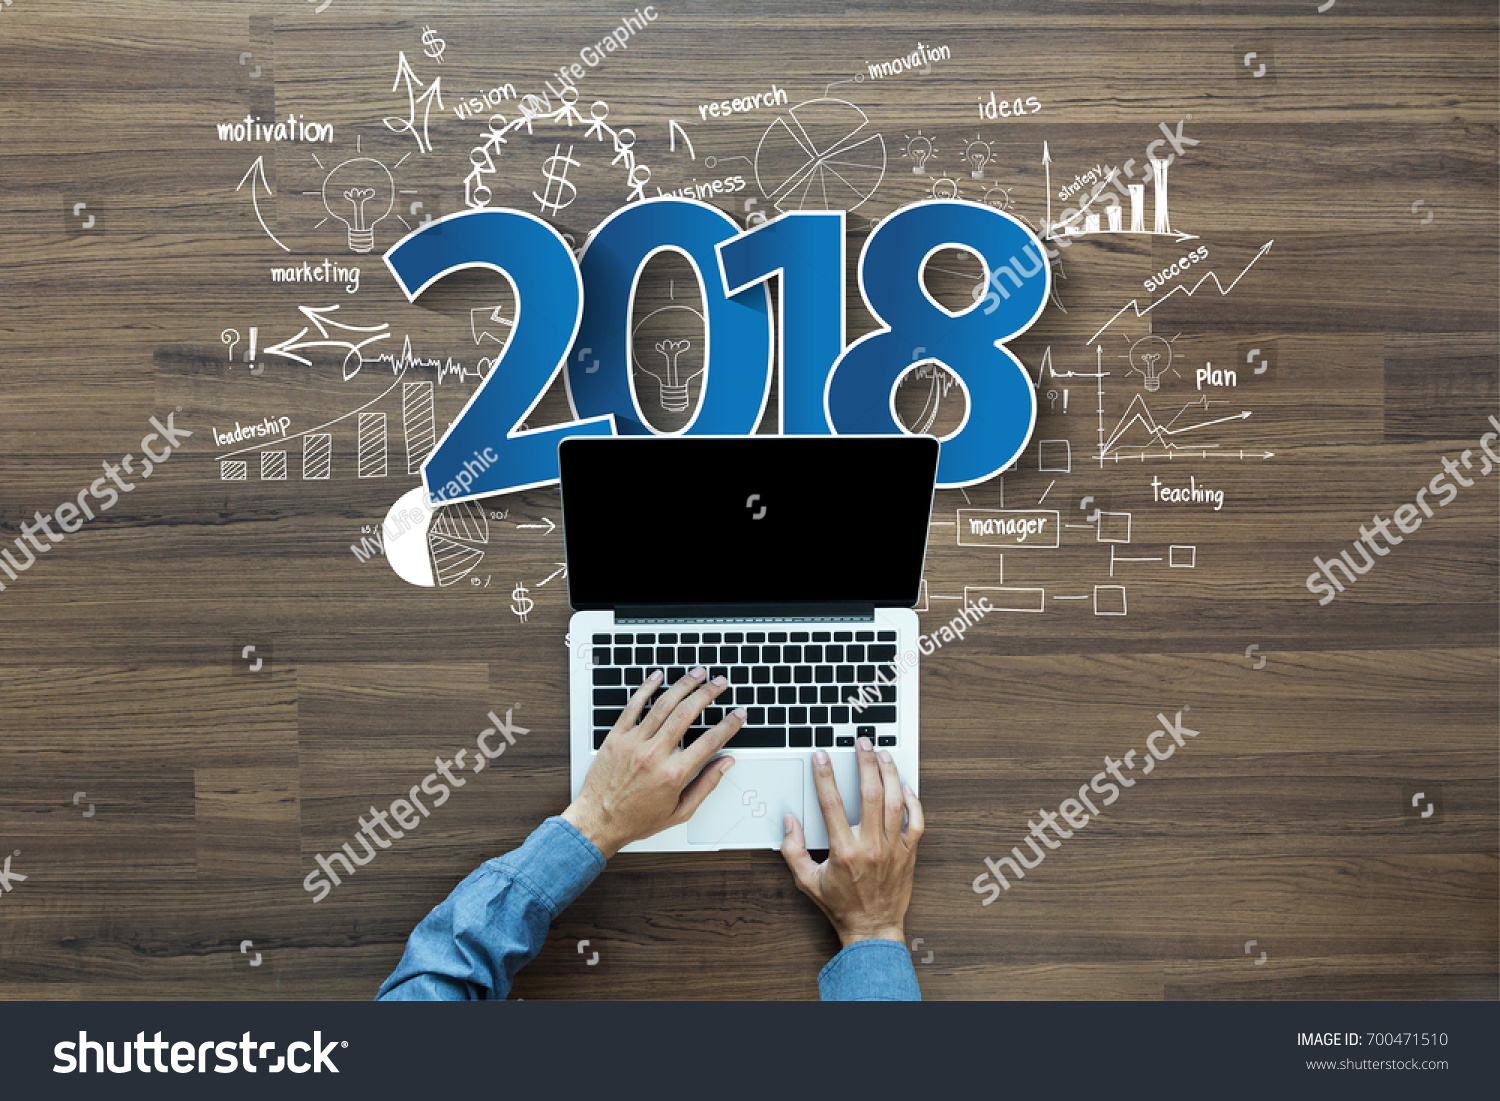 2018 new year business success, Creative thinking drawing charts and graphs strategy plan ideas wooden table background, Inspiration concept with businessman working on laptop computer PC, Top View #700471510